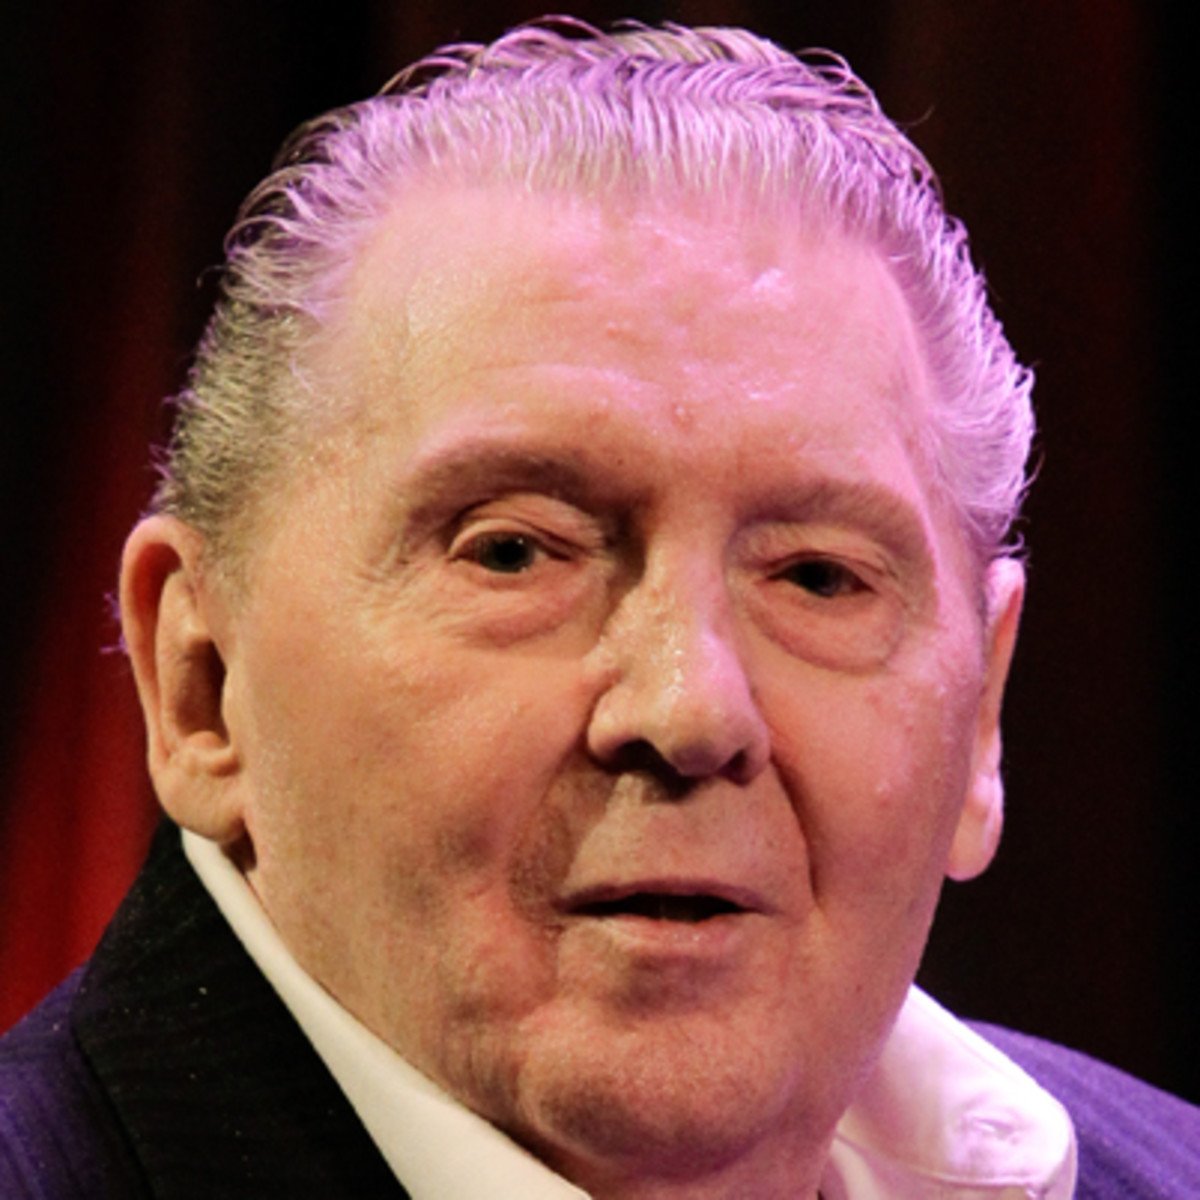 Great balls of fire! Jerry Lee Lewis turns 82 today. Happy birthday!  